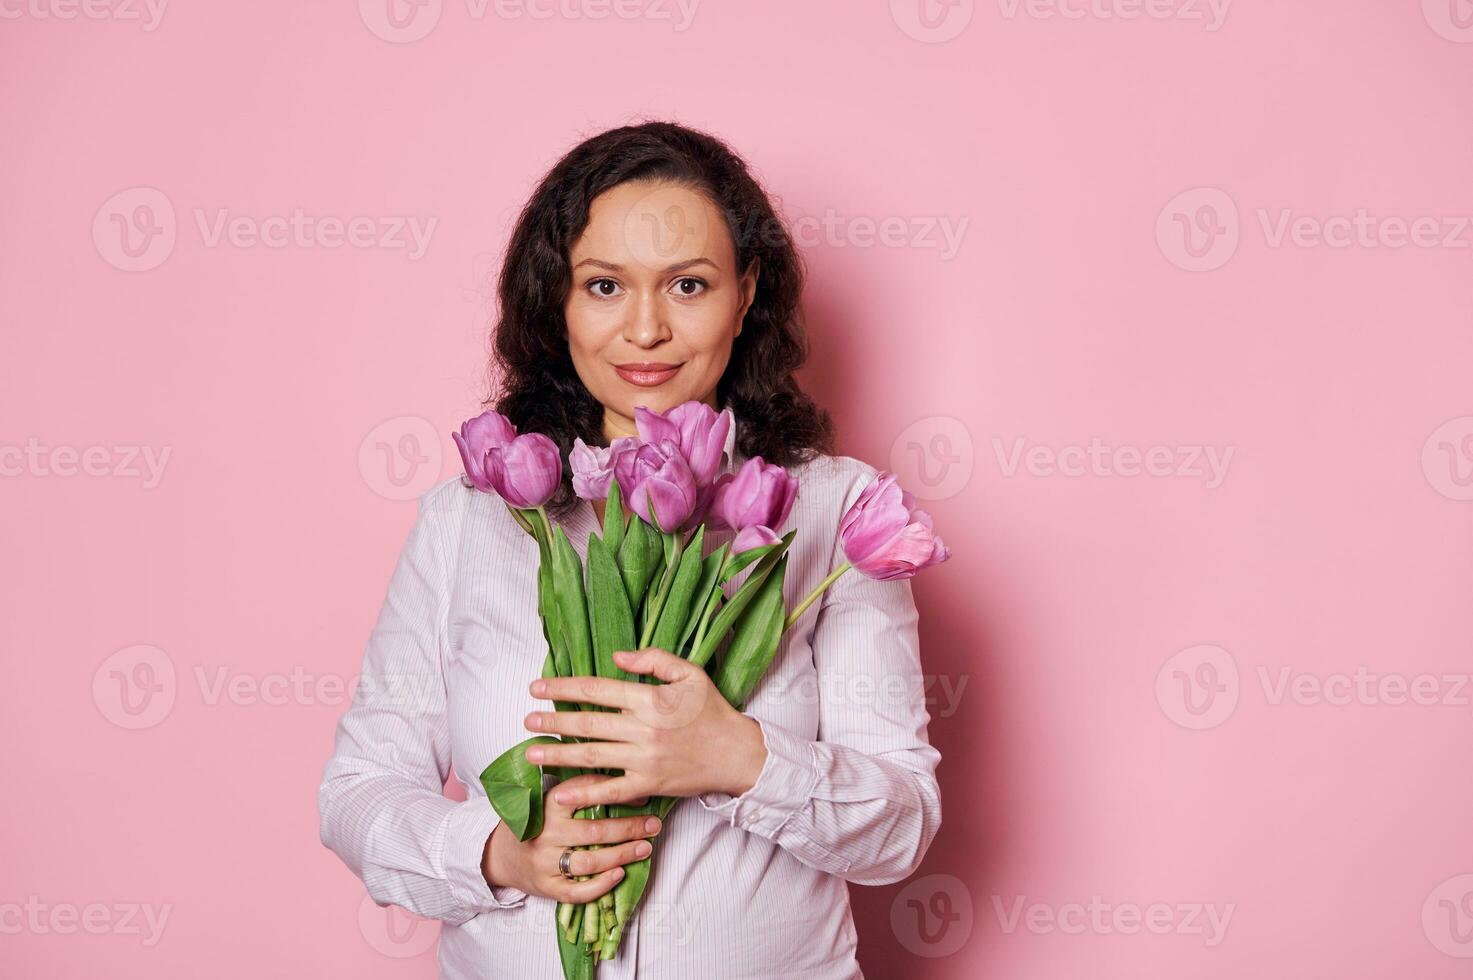 Confident beautiful woman with a bouquet of purple tulips, smiling looking at camera over isolated pink background photo